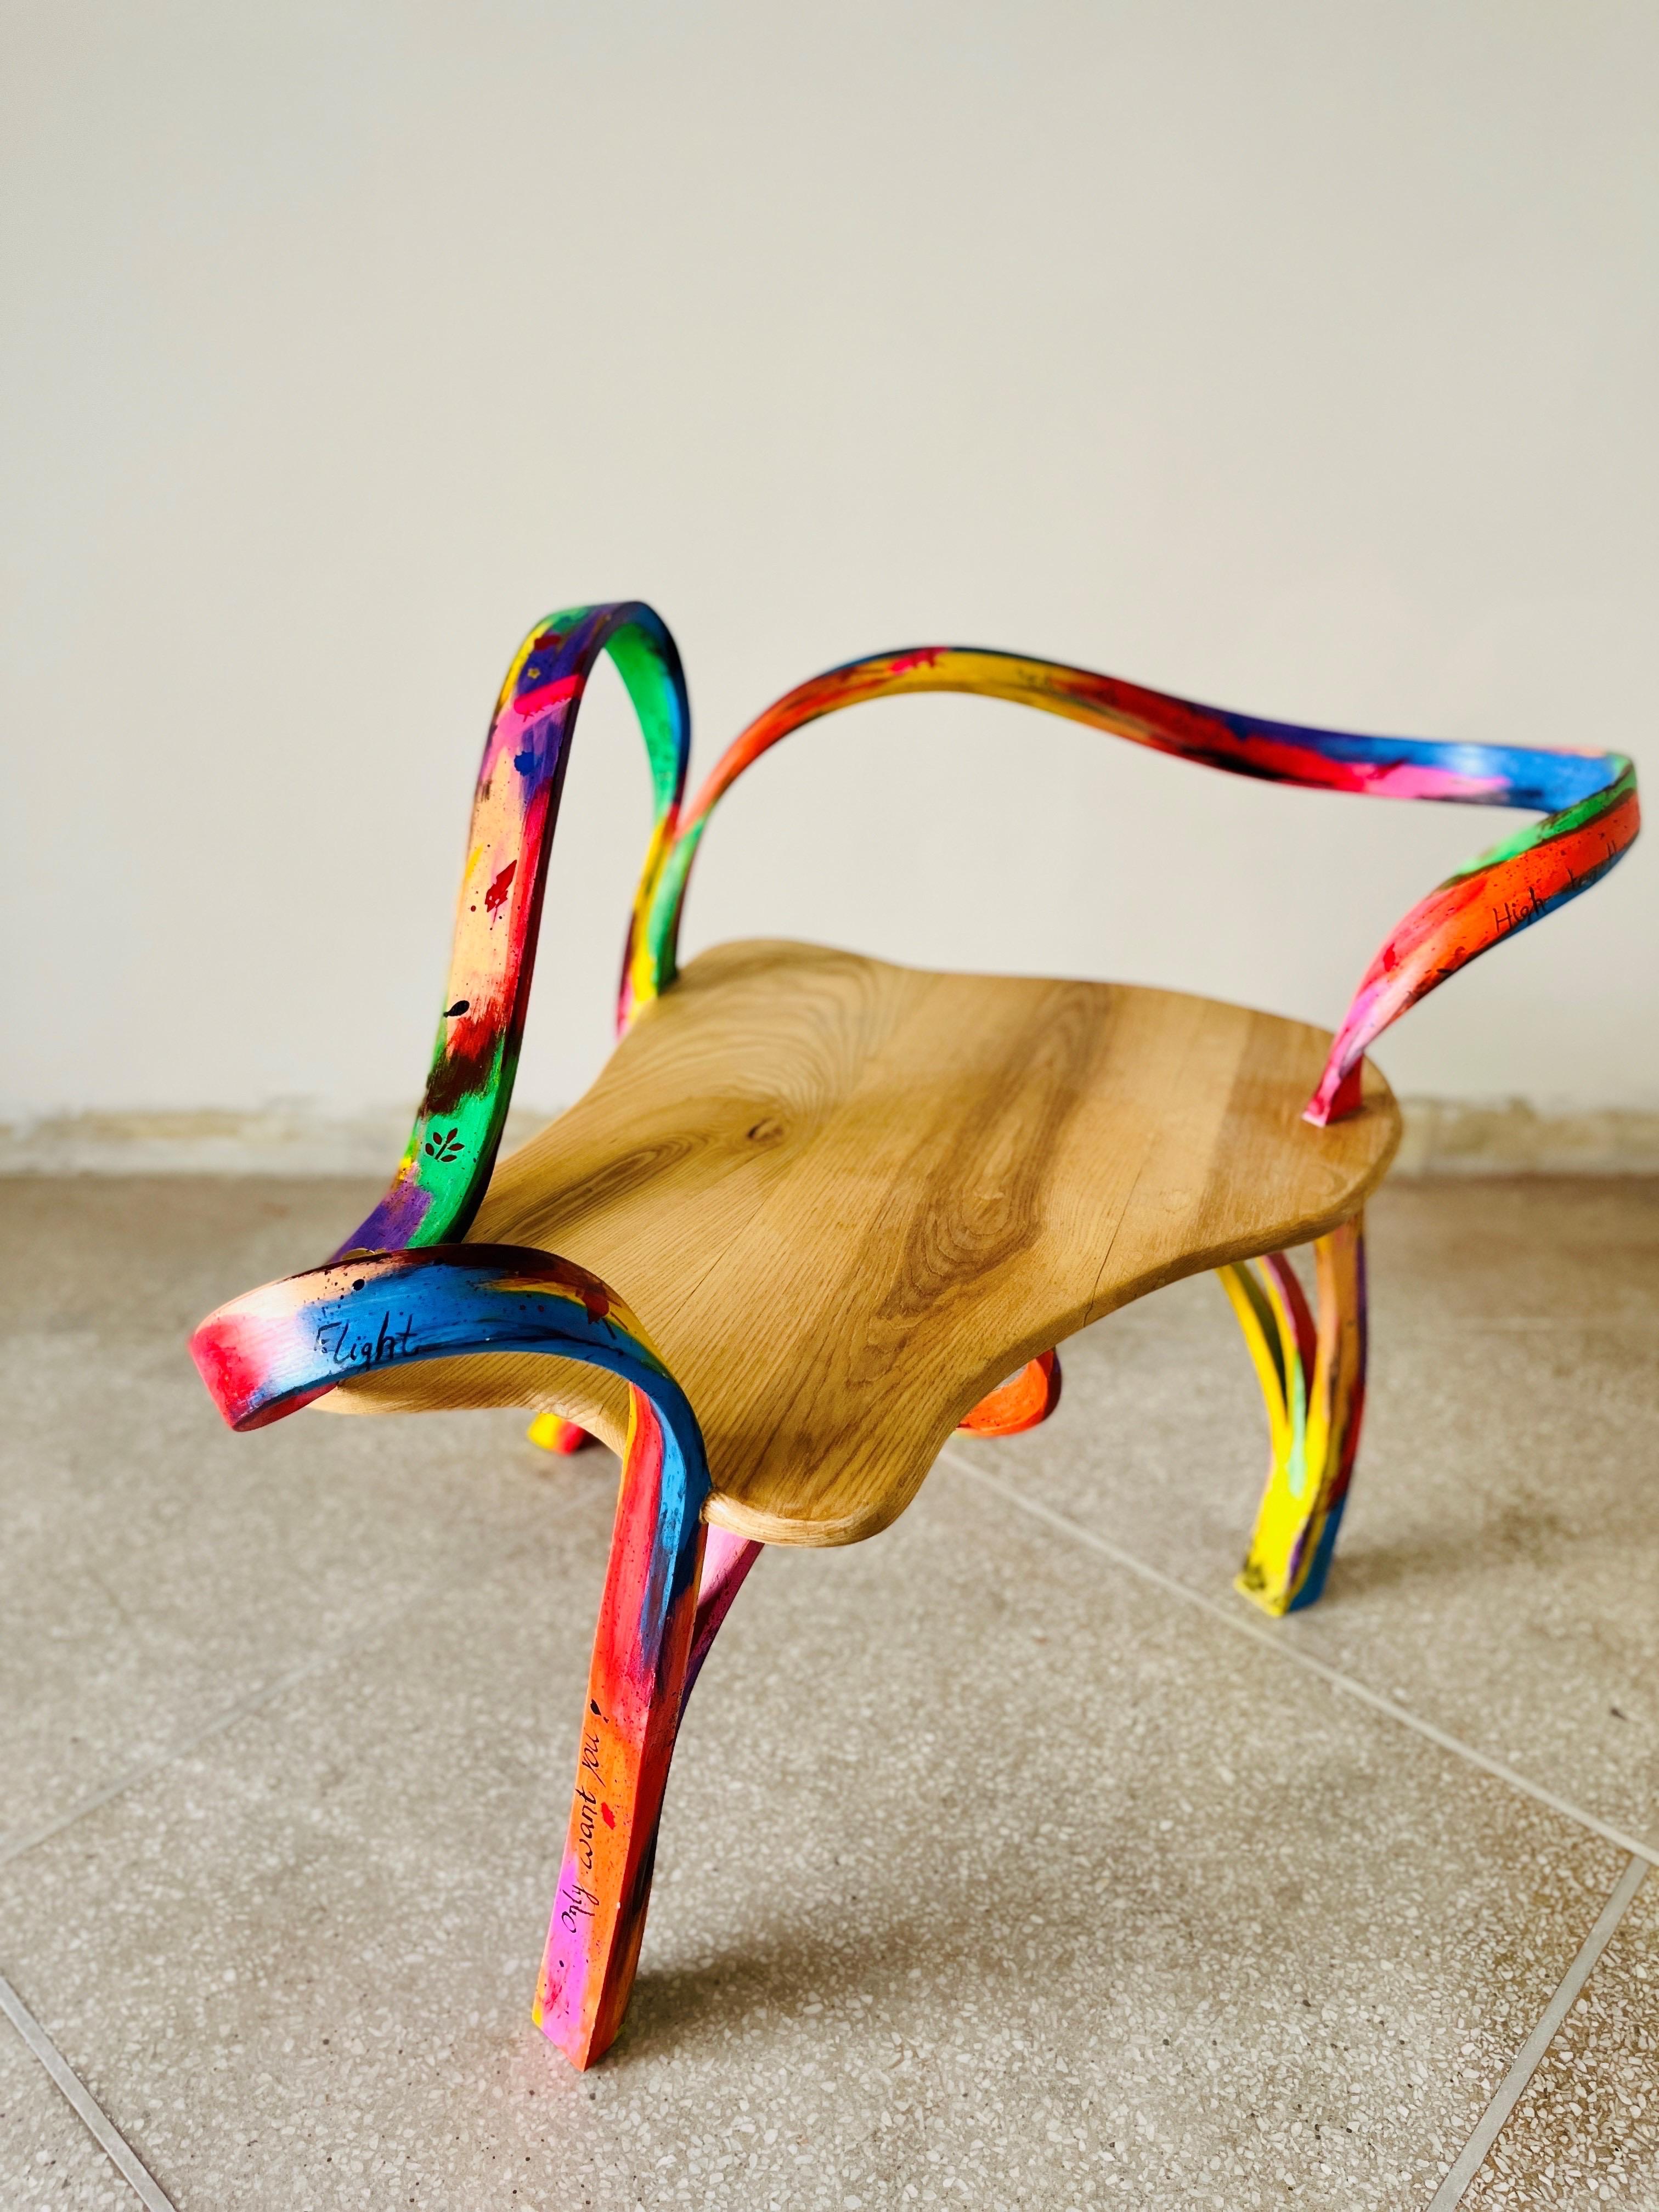 A single-seater chair designed and produced by Raka Studio and finished in collaboration with Hamza Khan Shirwani.

Made in solid ashwood by bending wood. Three of the legs have been made using the wood-bending technique to adopt an abstract natural